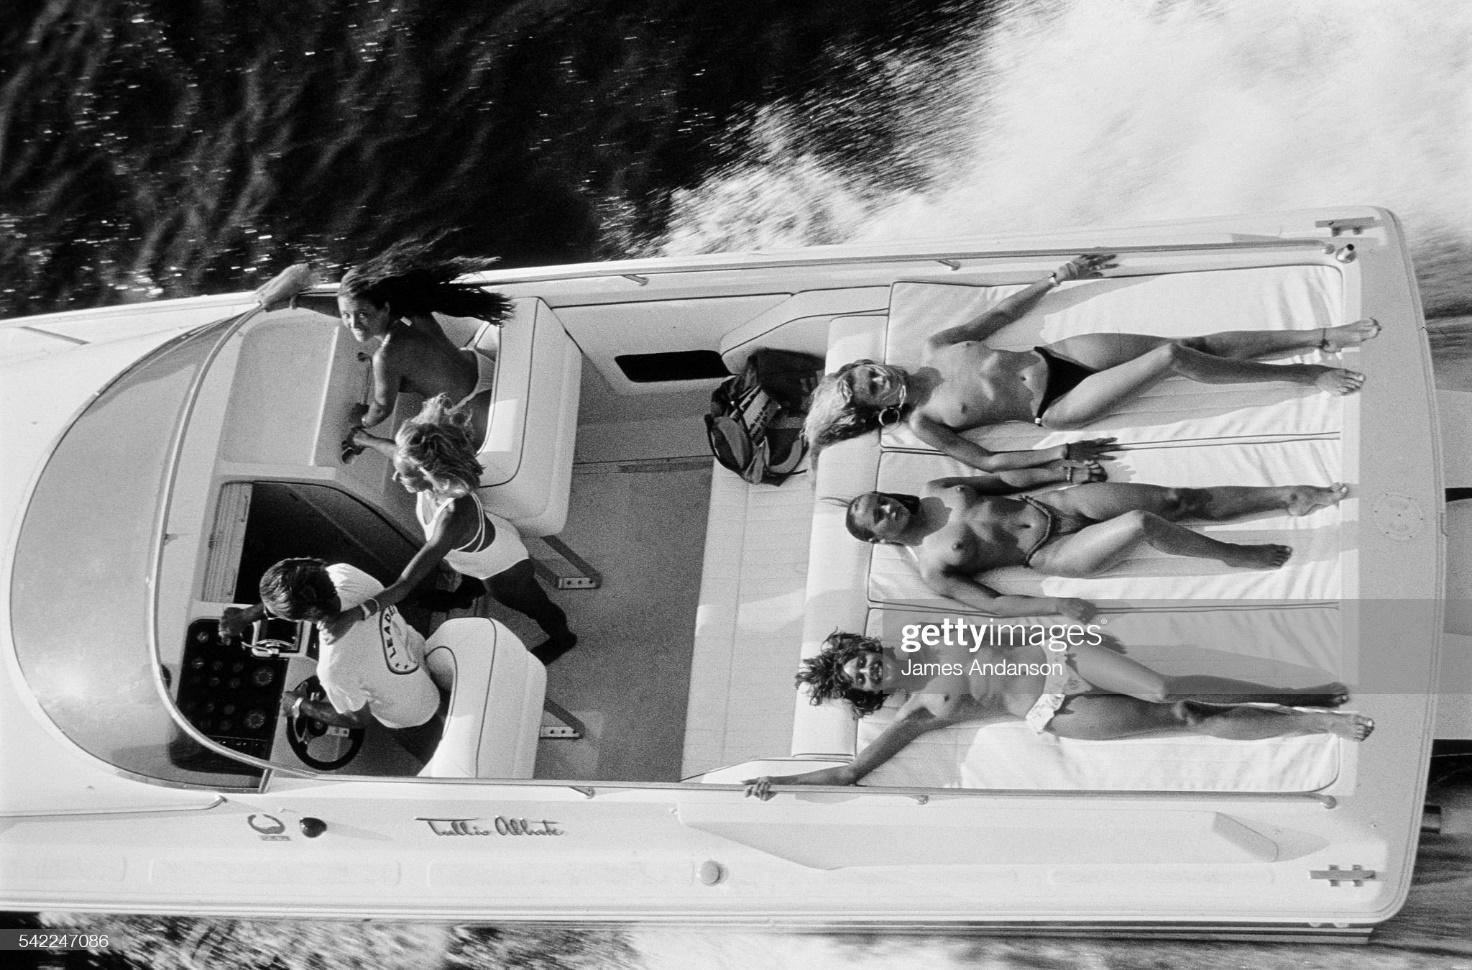 French socialite Jacqueline Veyssière, queen of the nights of Saint-Tropez, with friends aboard a Cigarette, a boat manufactured by Leader Racing, founded by former racing driver Didier Pironi.